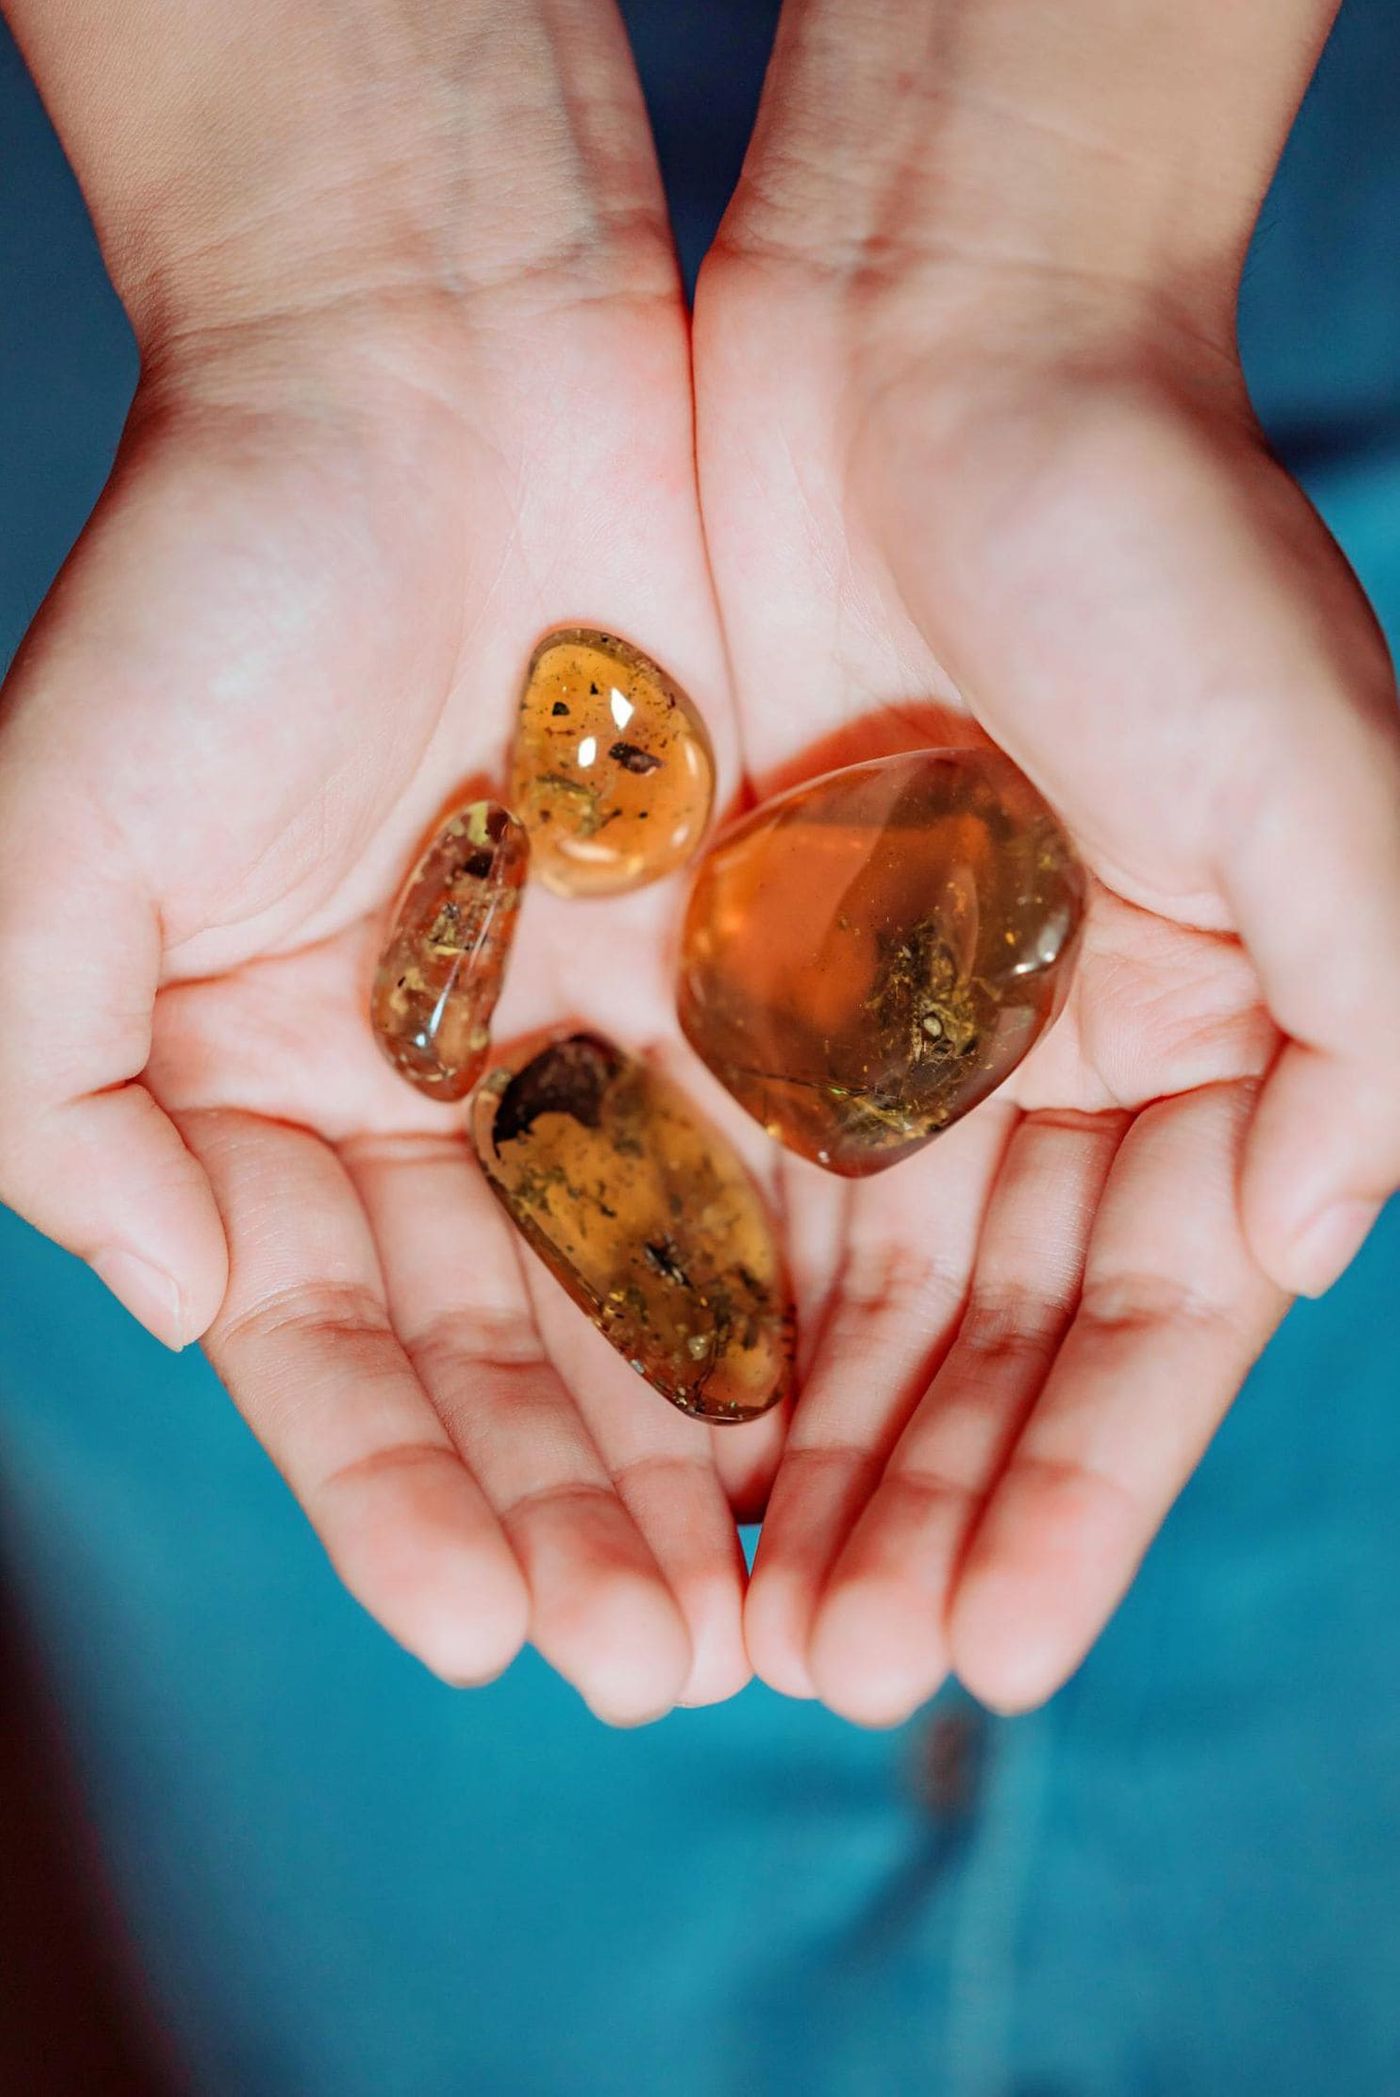 Images of the frogs in amber. Photo: The Washington Post